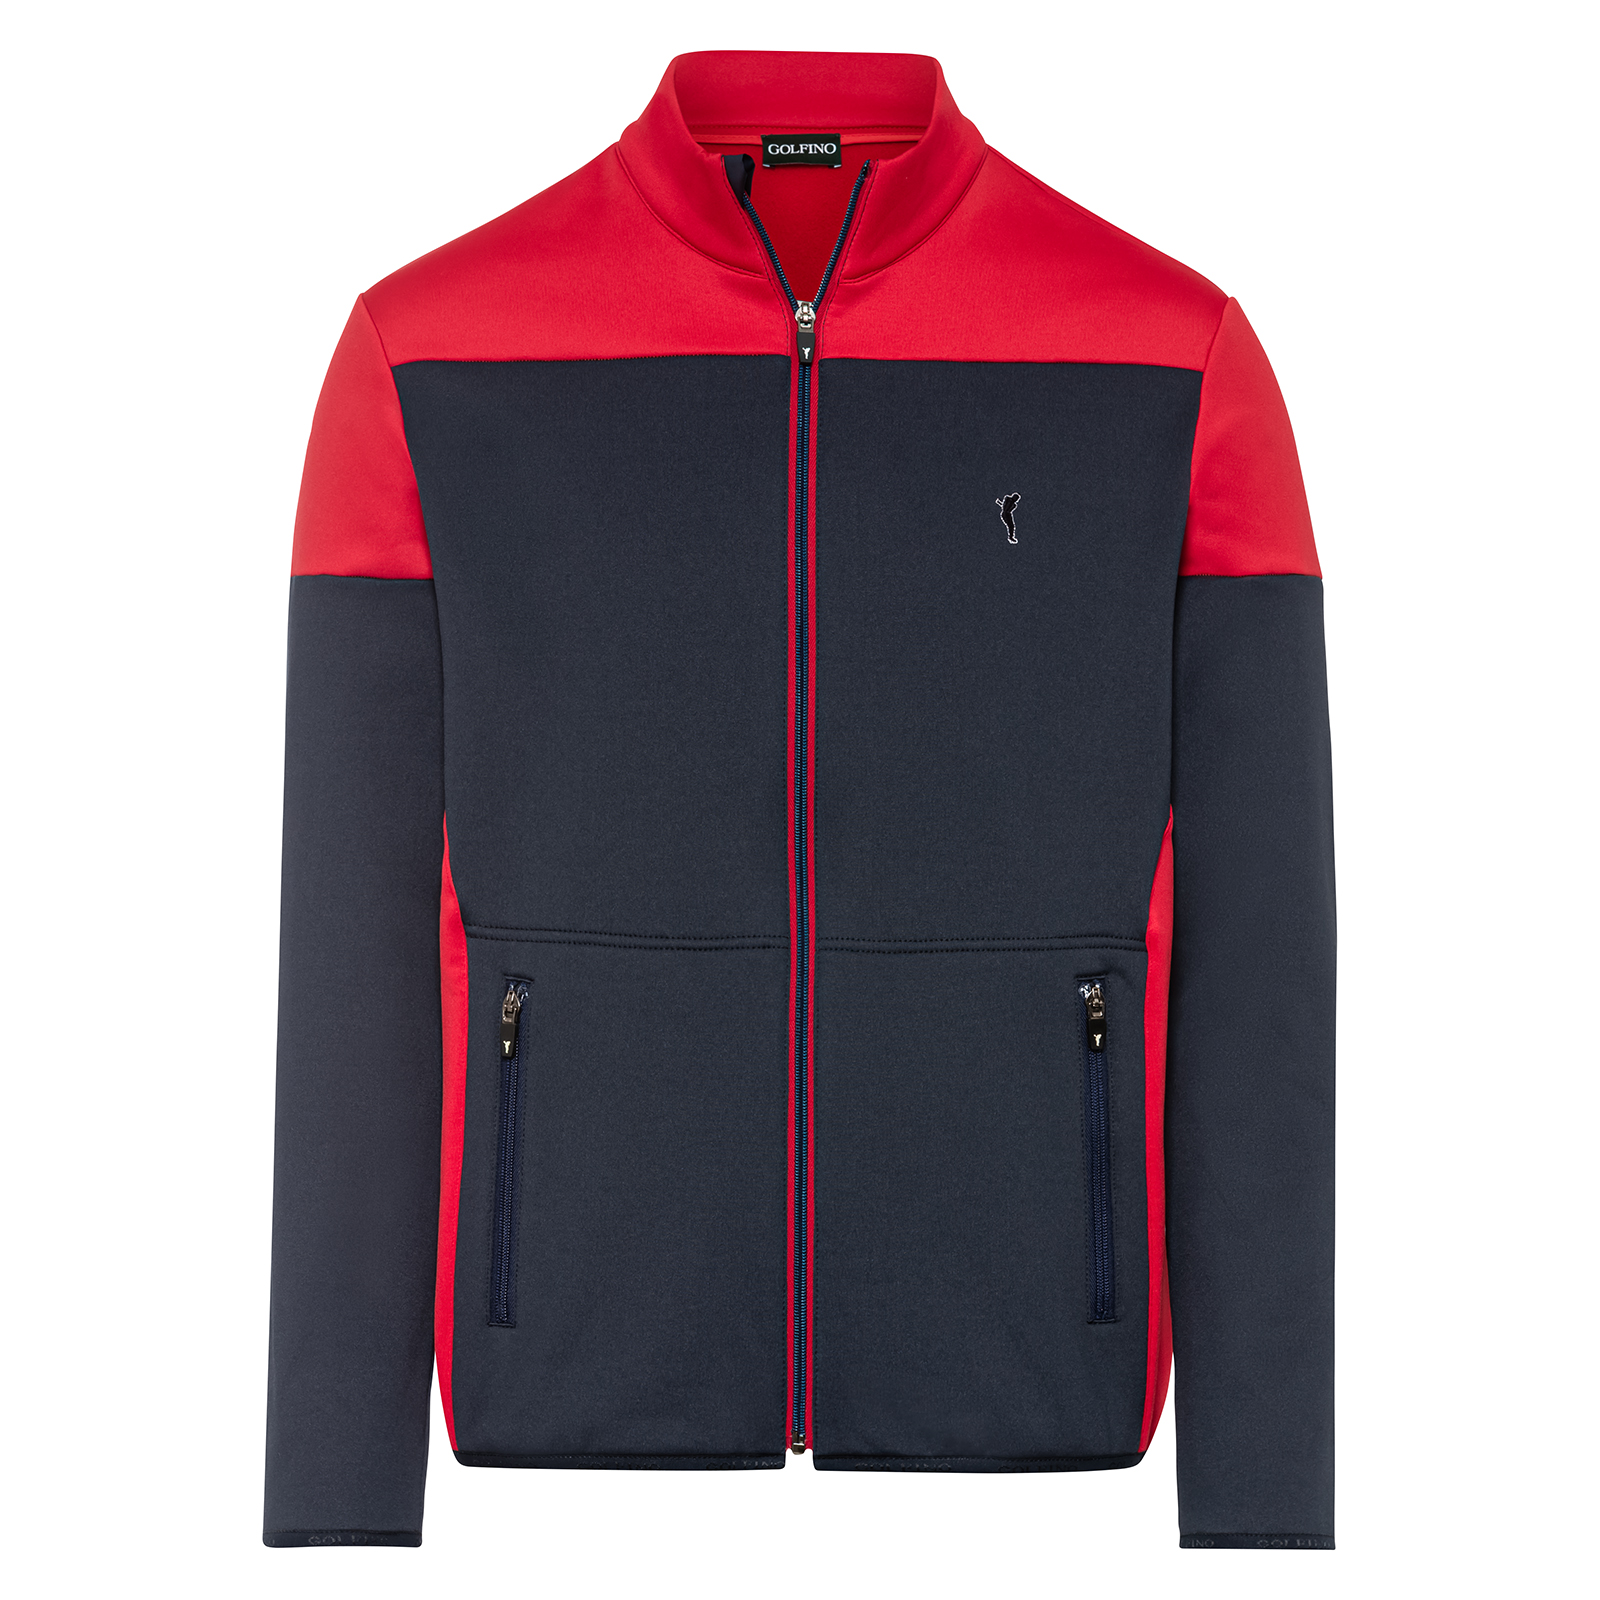 Men's fleece golf jacket with cold weather protection